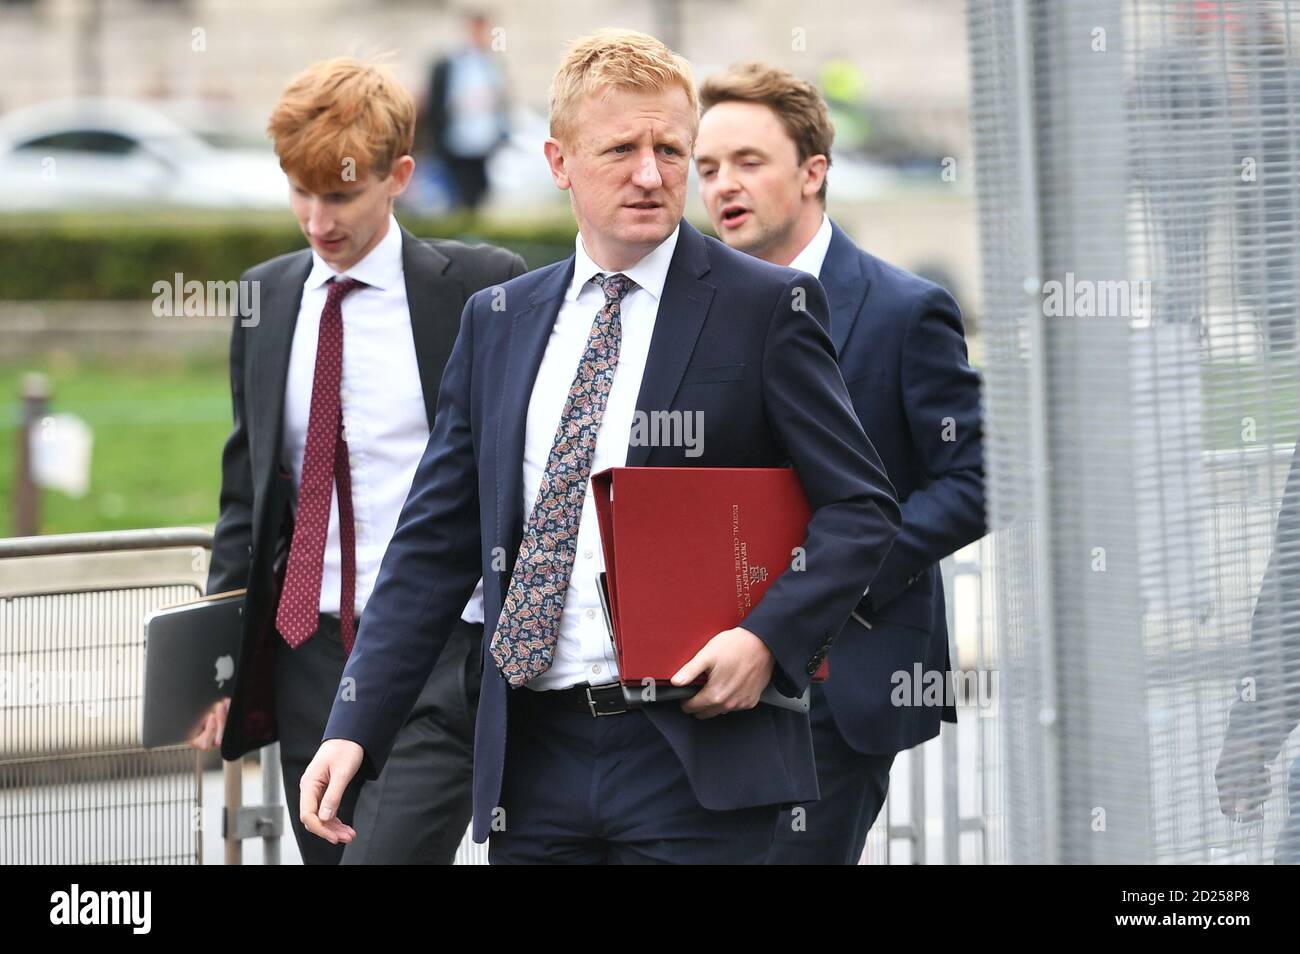 Digital, Culture, Media and sport Secretary Oliver Dowden arrives at the House of Commons, London, ahead of an MPs vote on the regulations which enforce the 'rule of six' in England in order to allow them to continue. Stock Photo